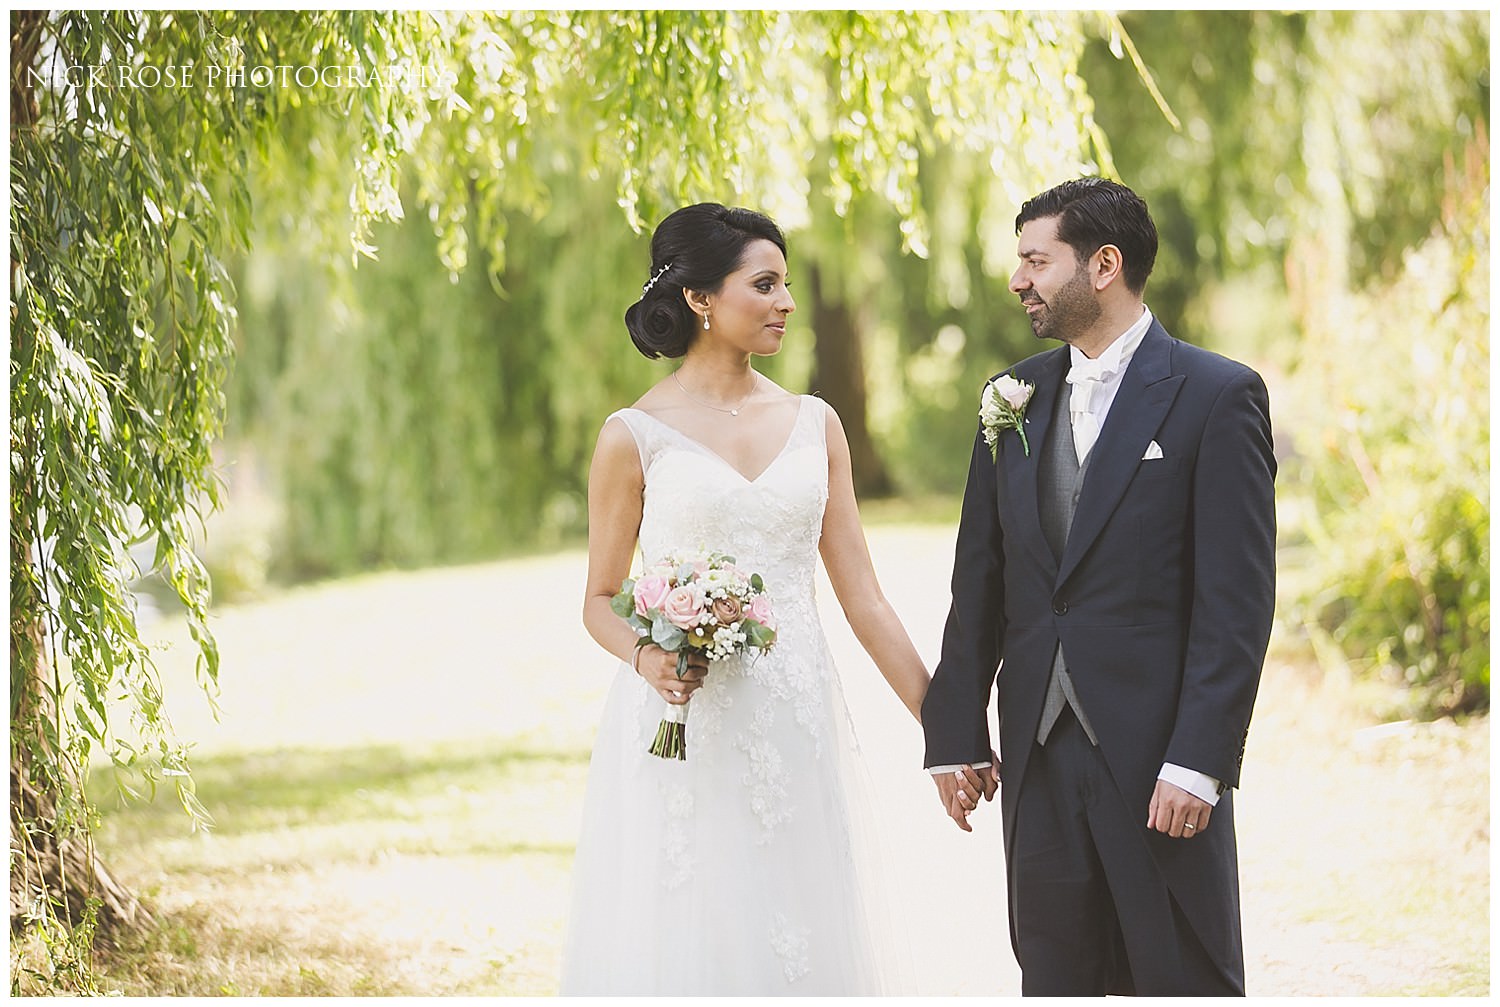  Bride and groom wedding portrait photograph under a willow tree at Hever Castle Kent 